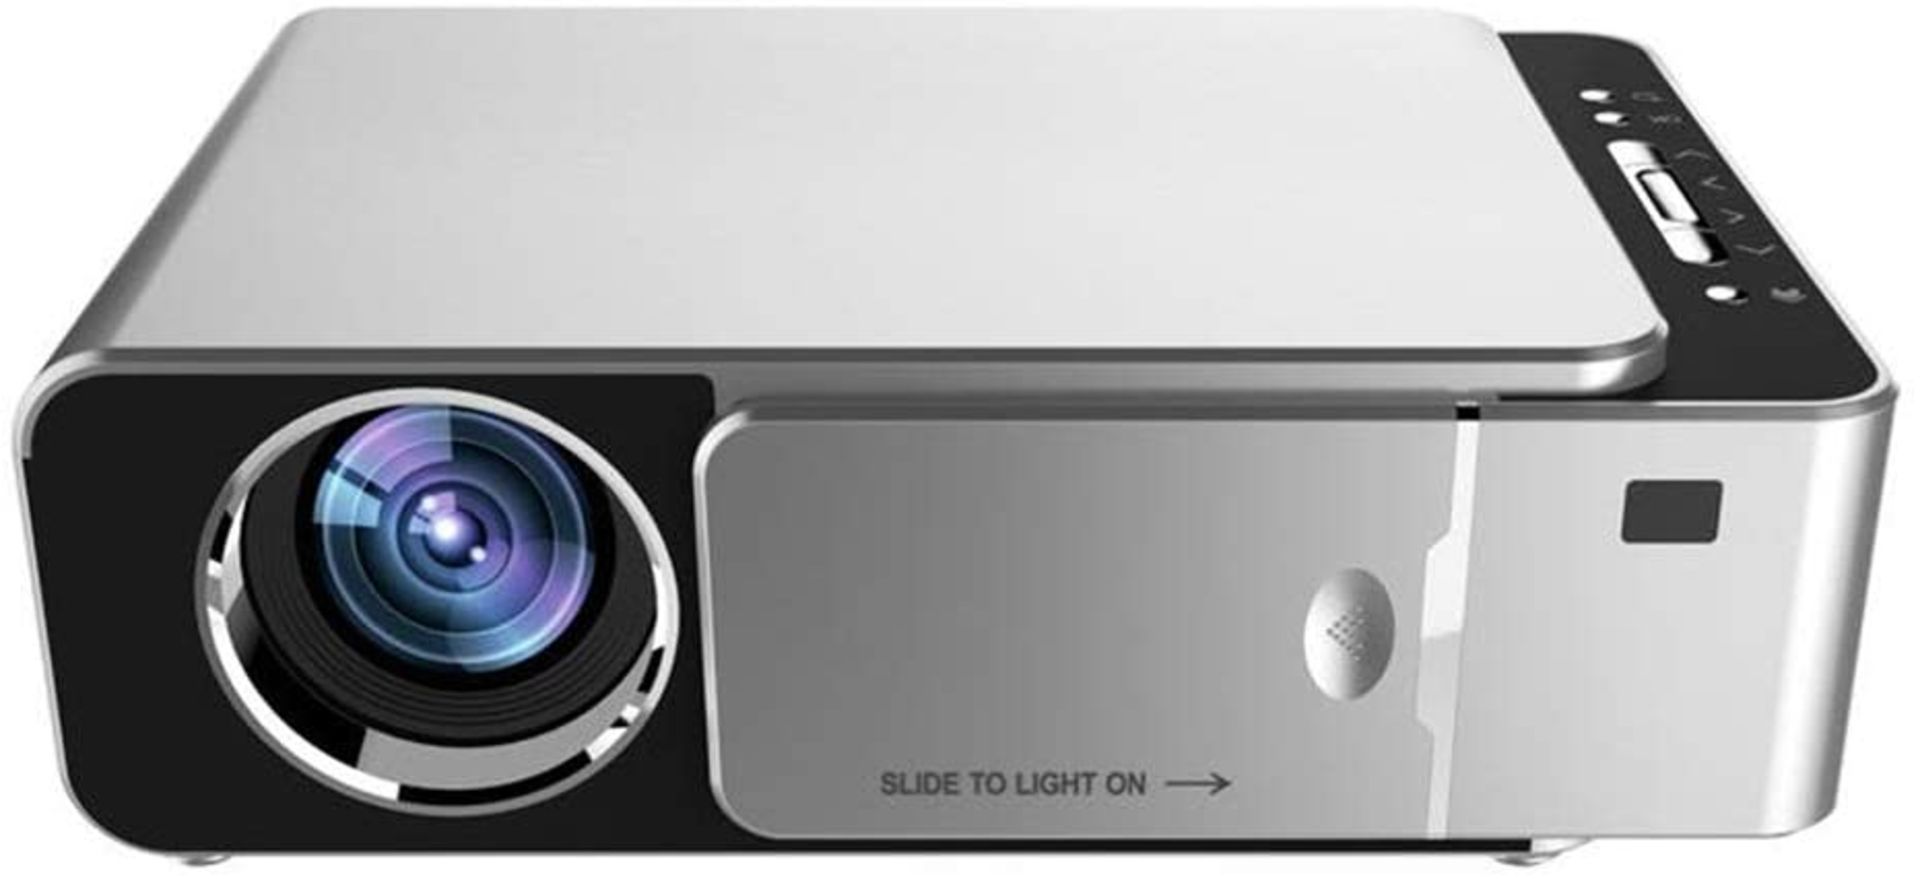 Rrp £140 Oipoodde Projector Lcd Projector 1280 X 720P Hd 3500 Lumens Led Multimedia Home Theater Vid